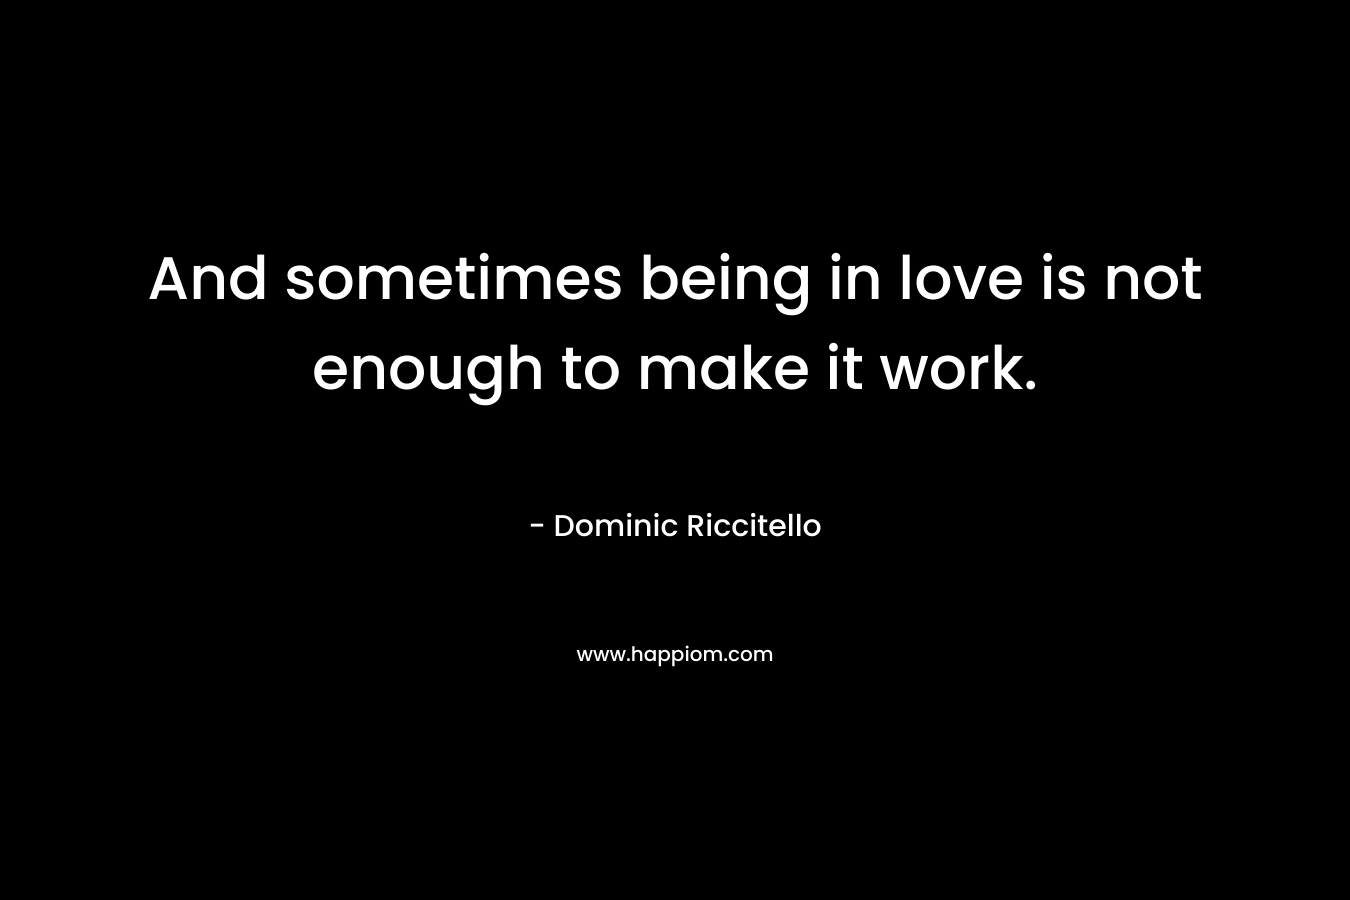 And sometimes being in love is not enough to make it work. – Dominic Riccitello